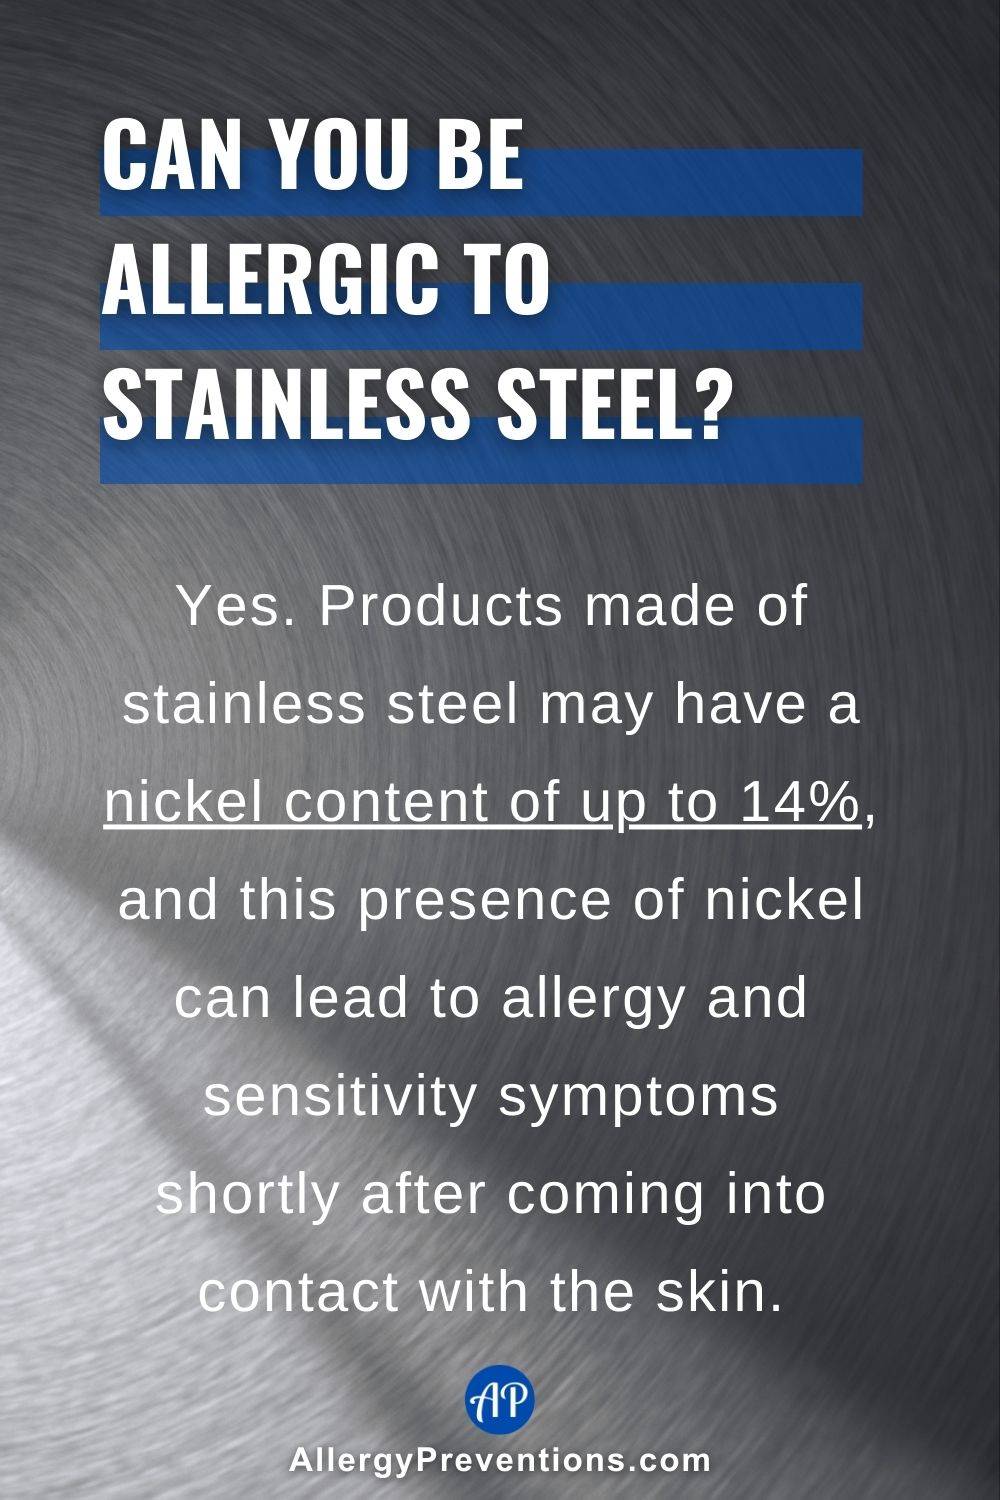 Can you be allergic to stainless steel infographic. Can you be allergic to stainless steel? Yes. Products made of stainless steel may have a nickel content of up to 14%, and this presence of nickel can lead to a stainless steel metal allergy and sensitivity symptoms shortly after coming into contact with the skin.